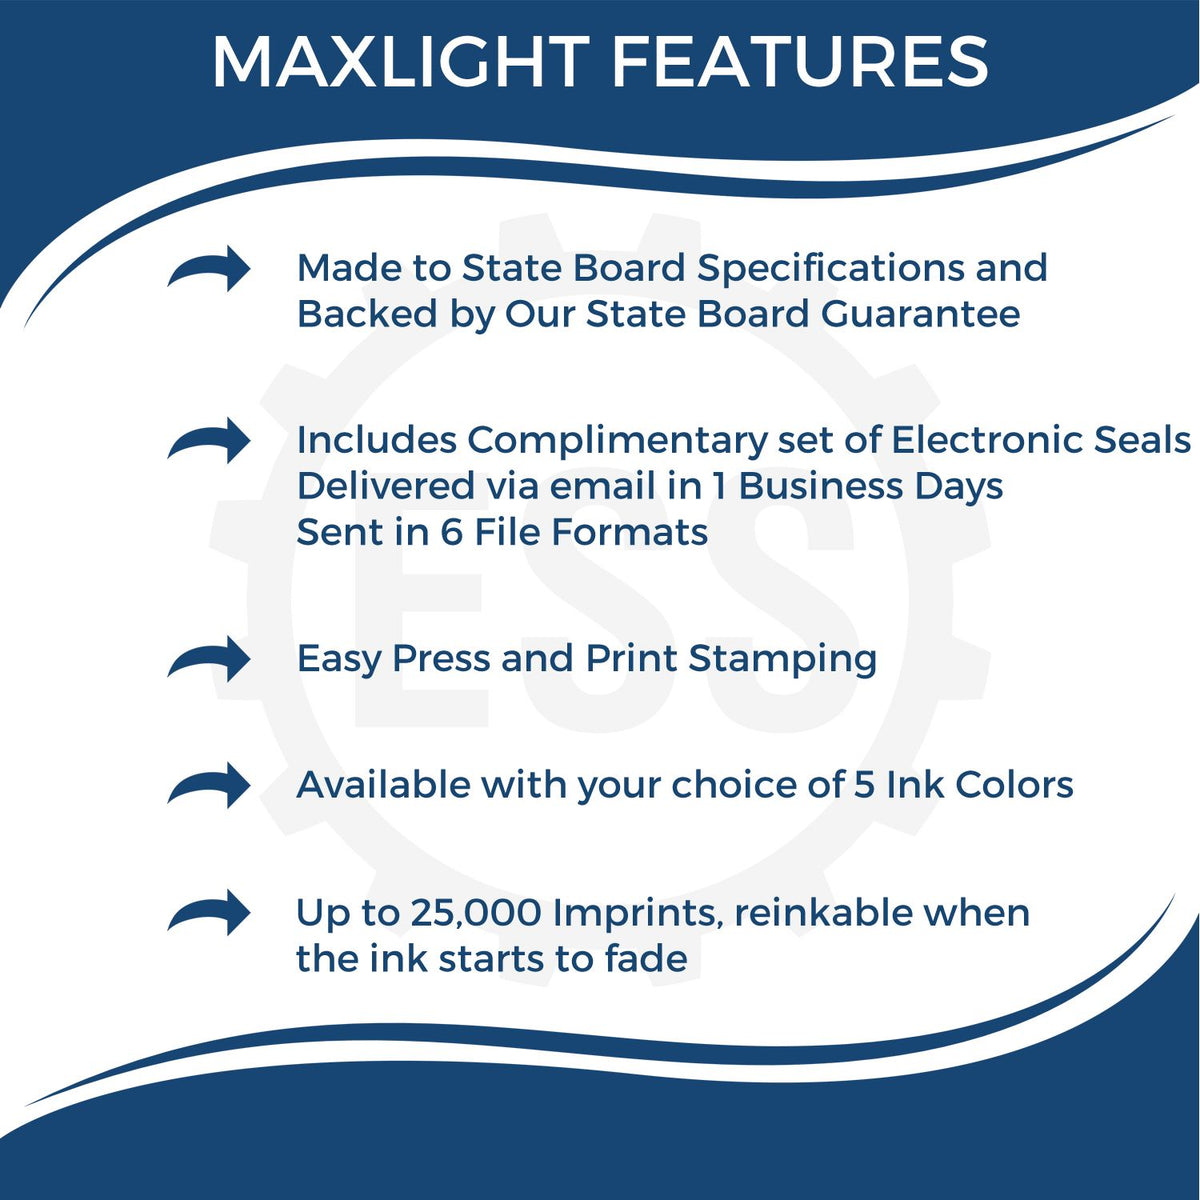 A picture of an infographic highlighting the selling points for the MaxLight Premium Pre-Inked Vermont State Seal Notarial Stamp